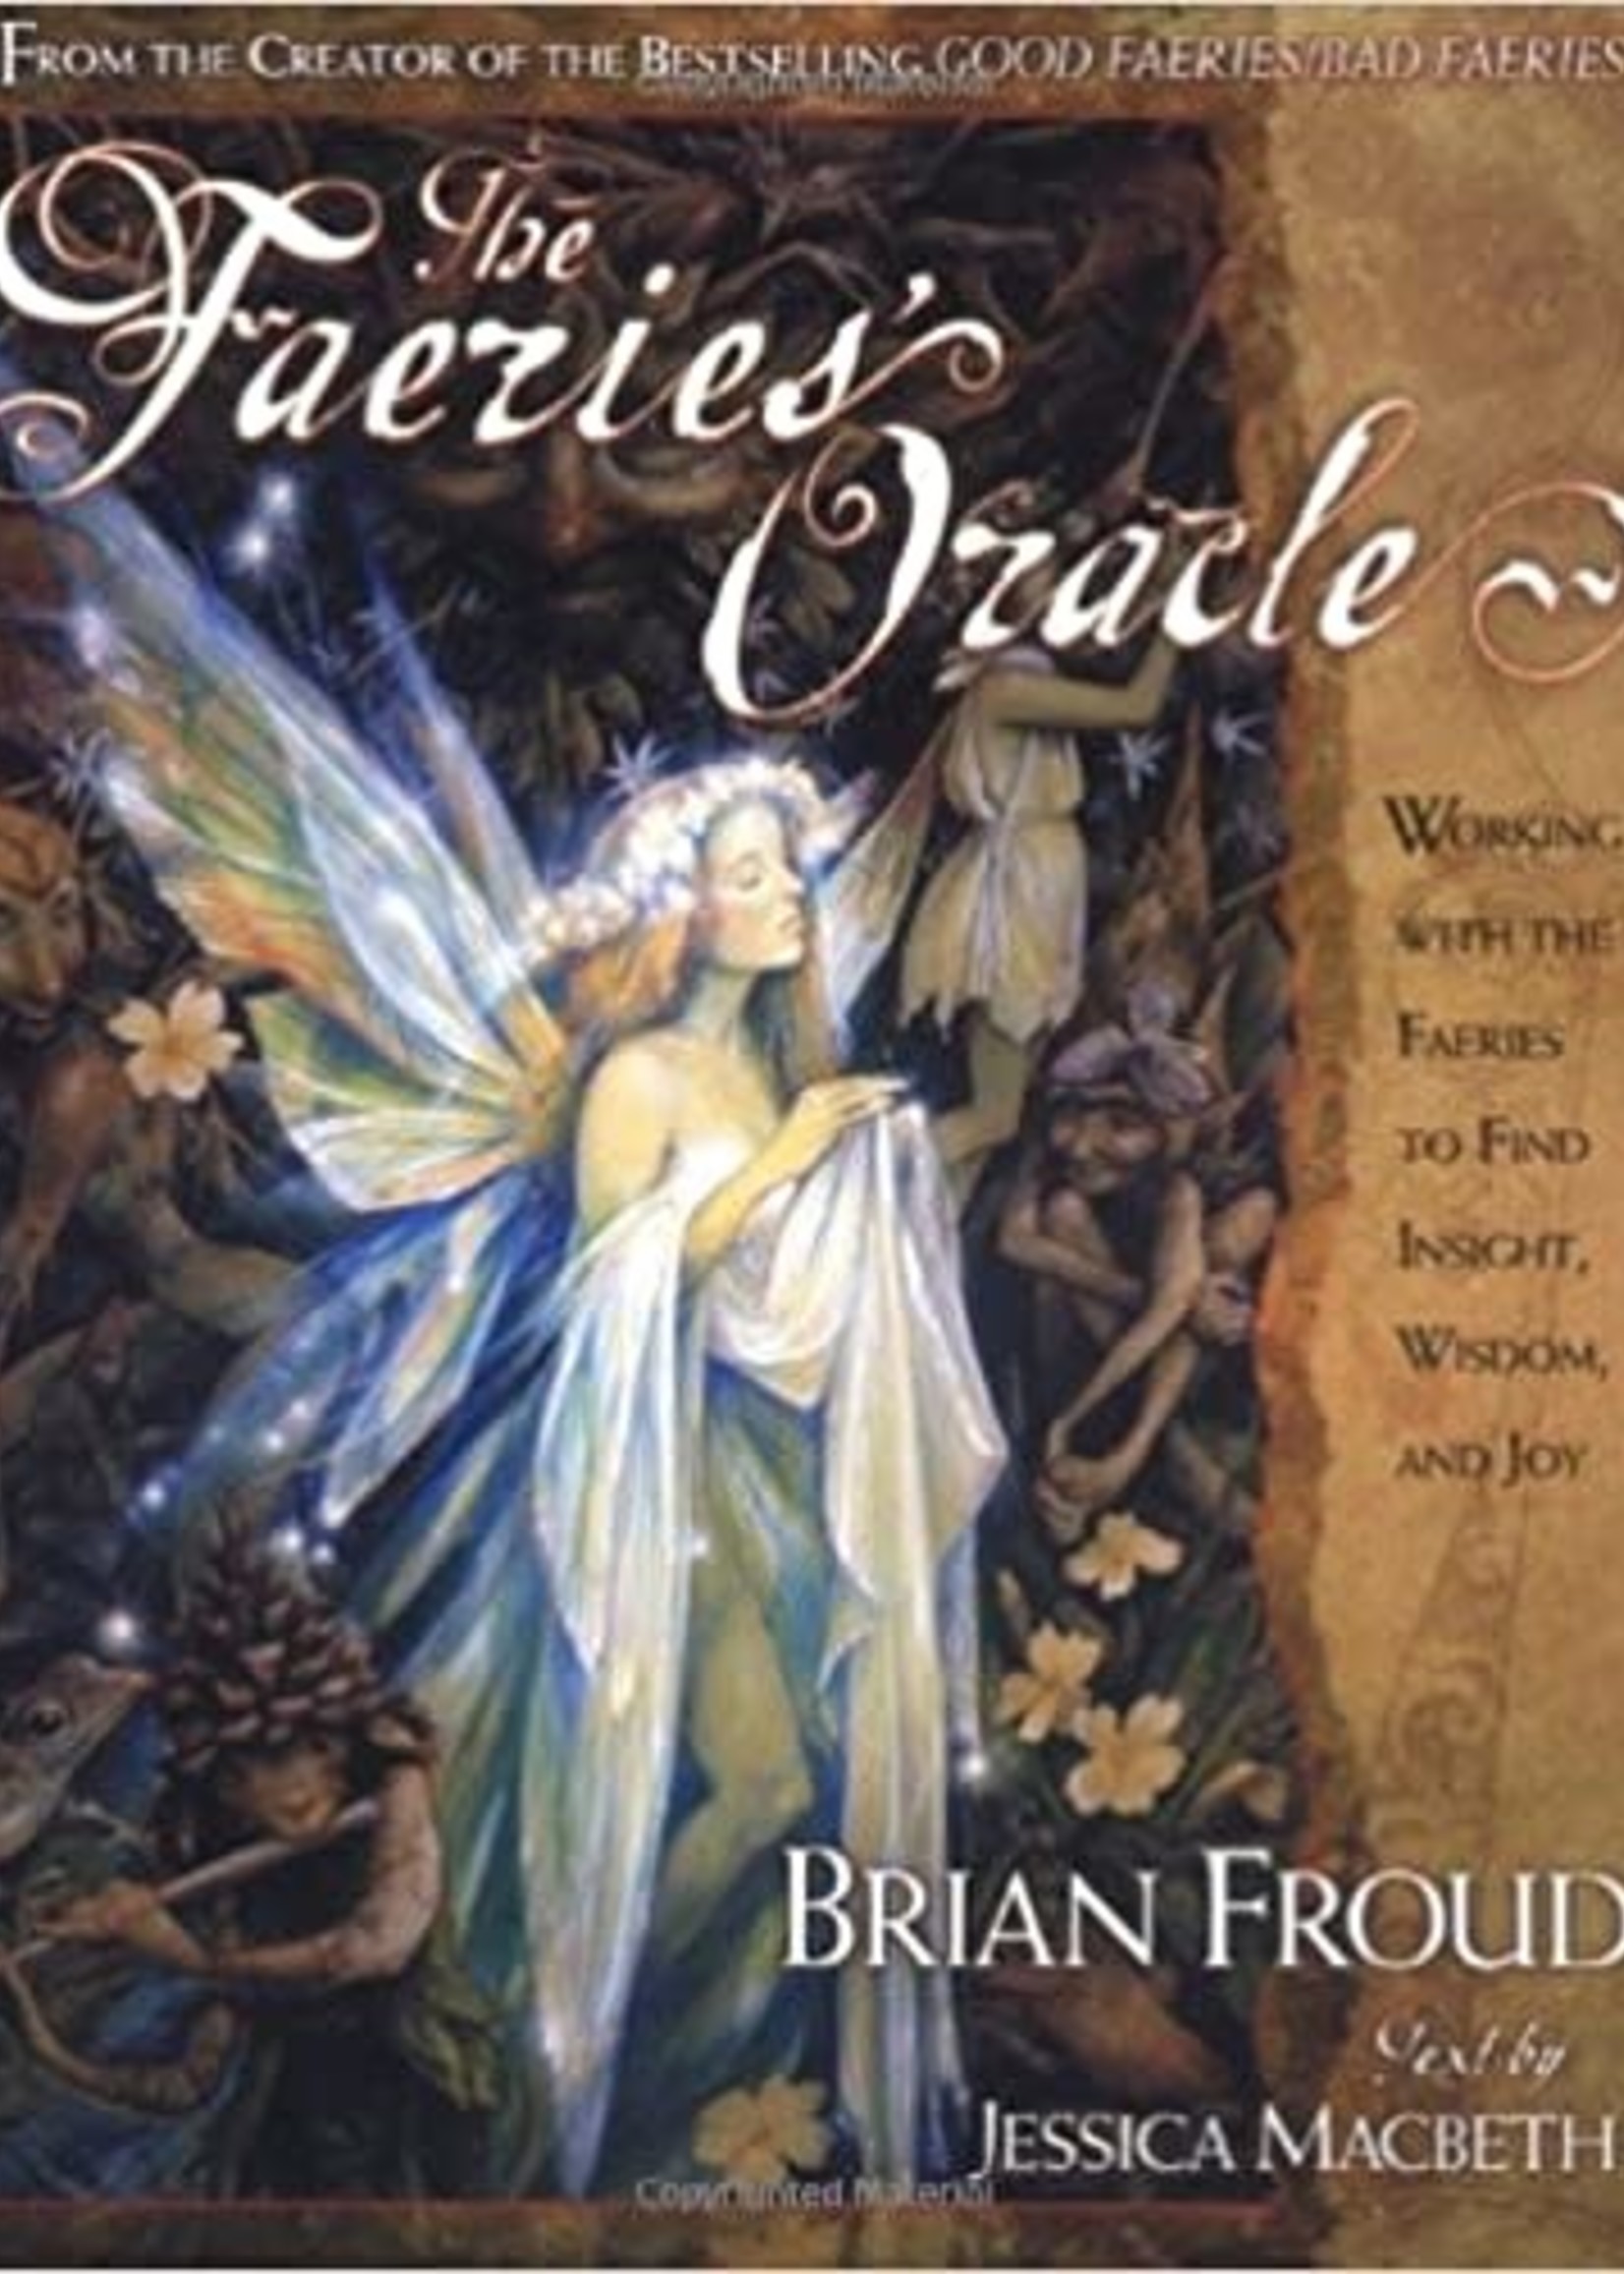 Deck FAERIES' ORACLE: Working With The Faeries To Find Wisdom, Insight & Joy (book & 66 cards)